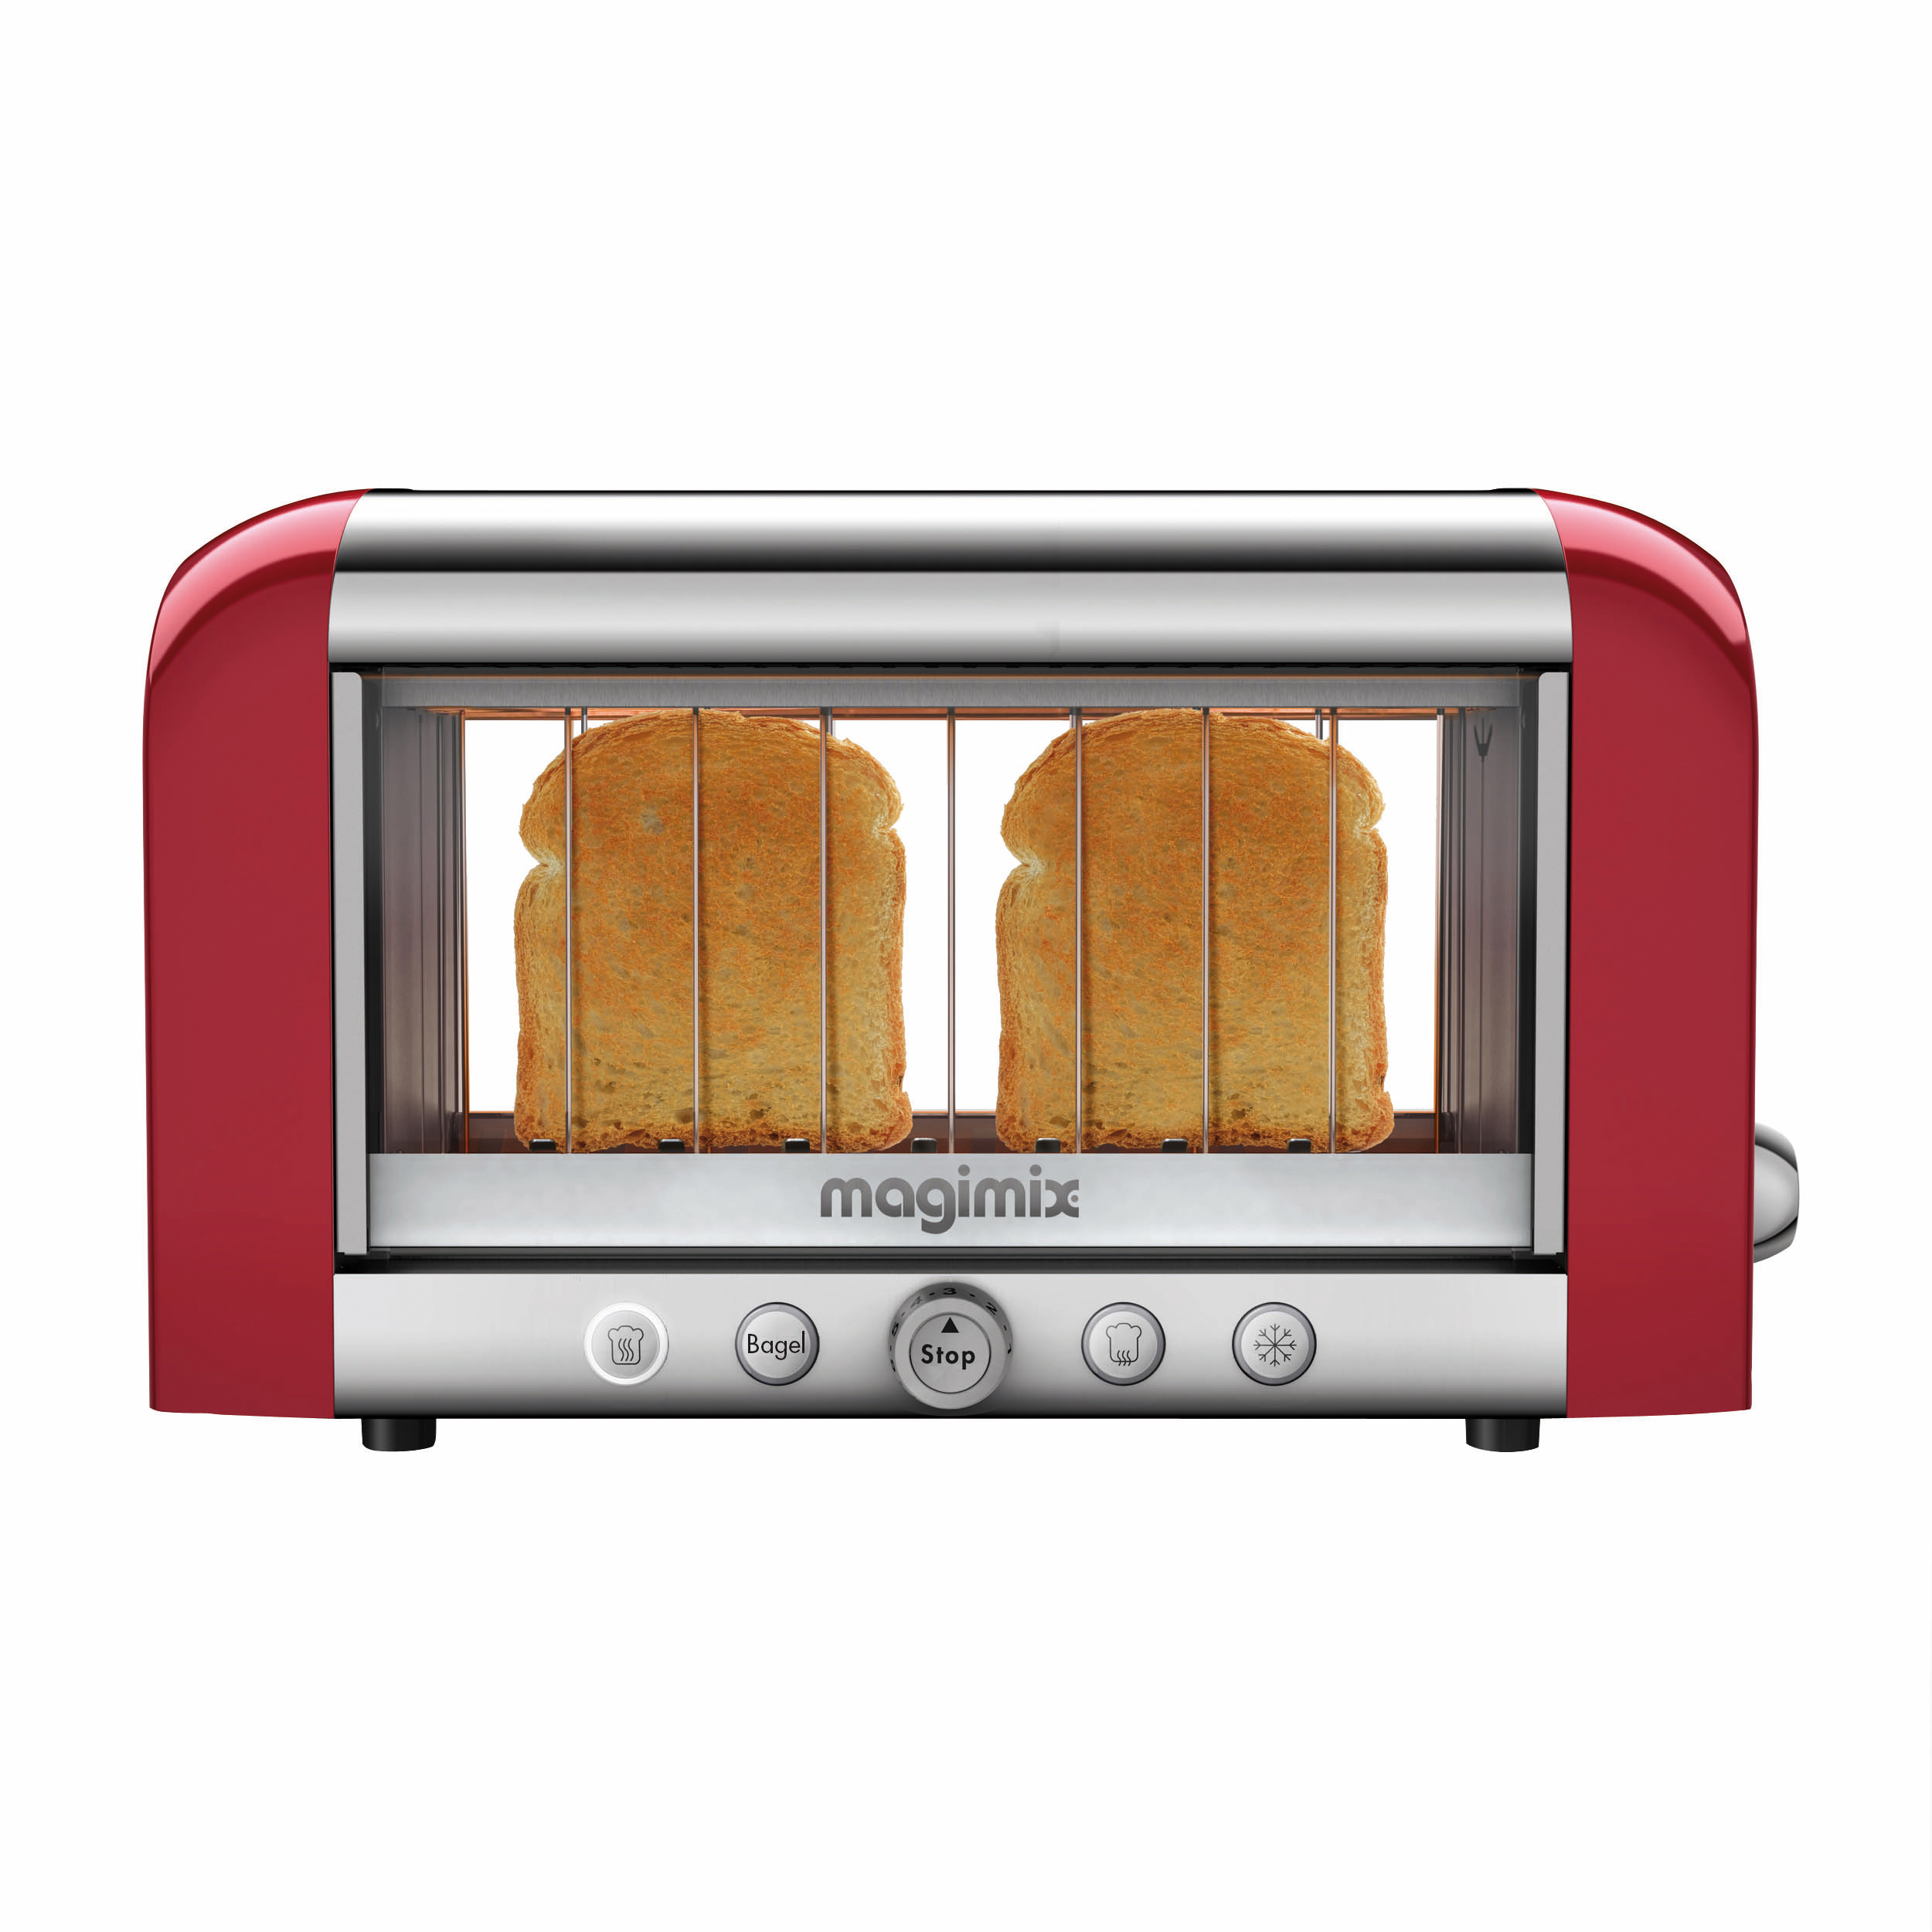 Magimix colored vision toaster